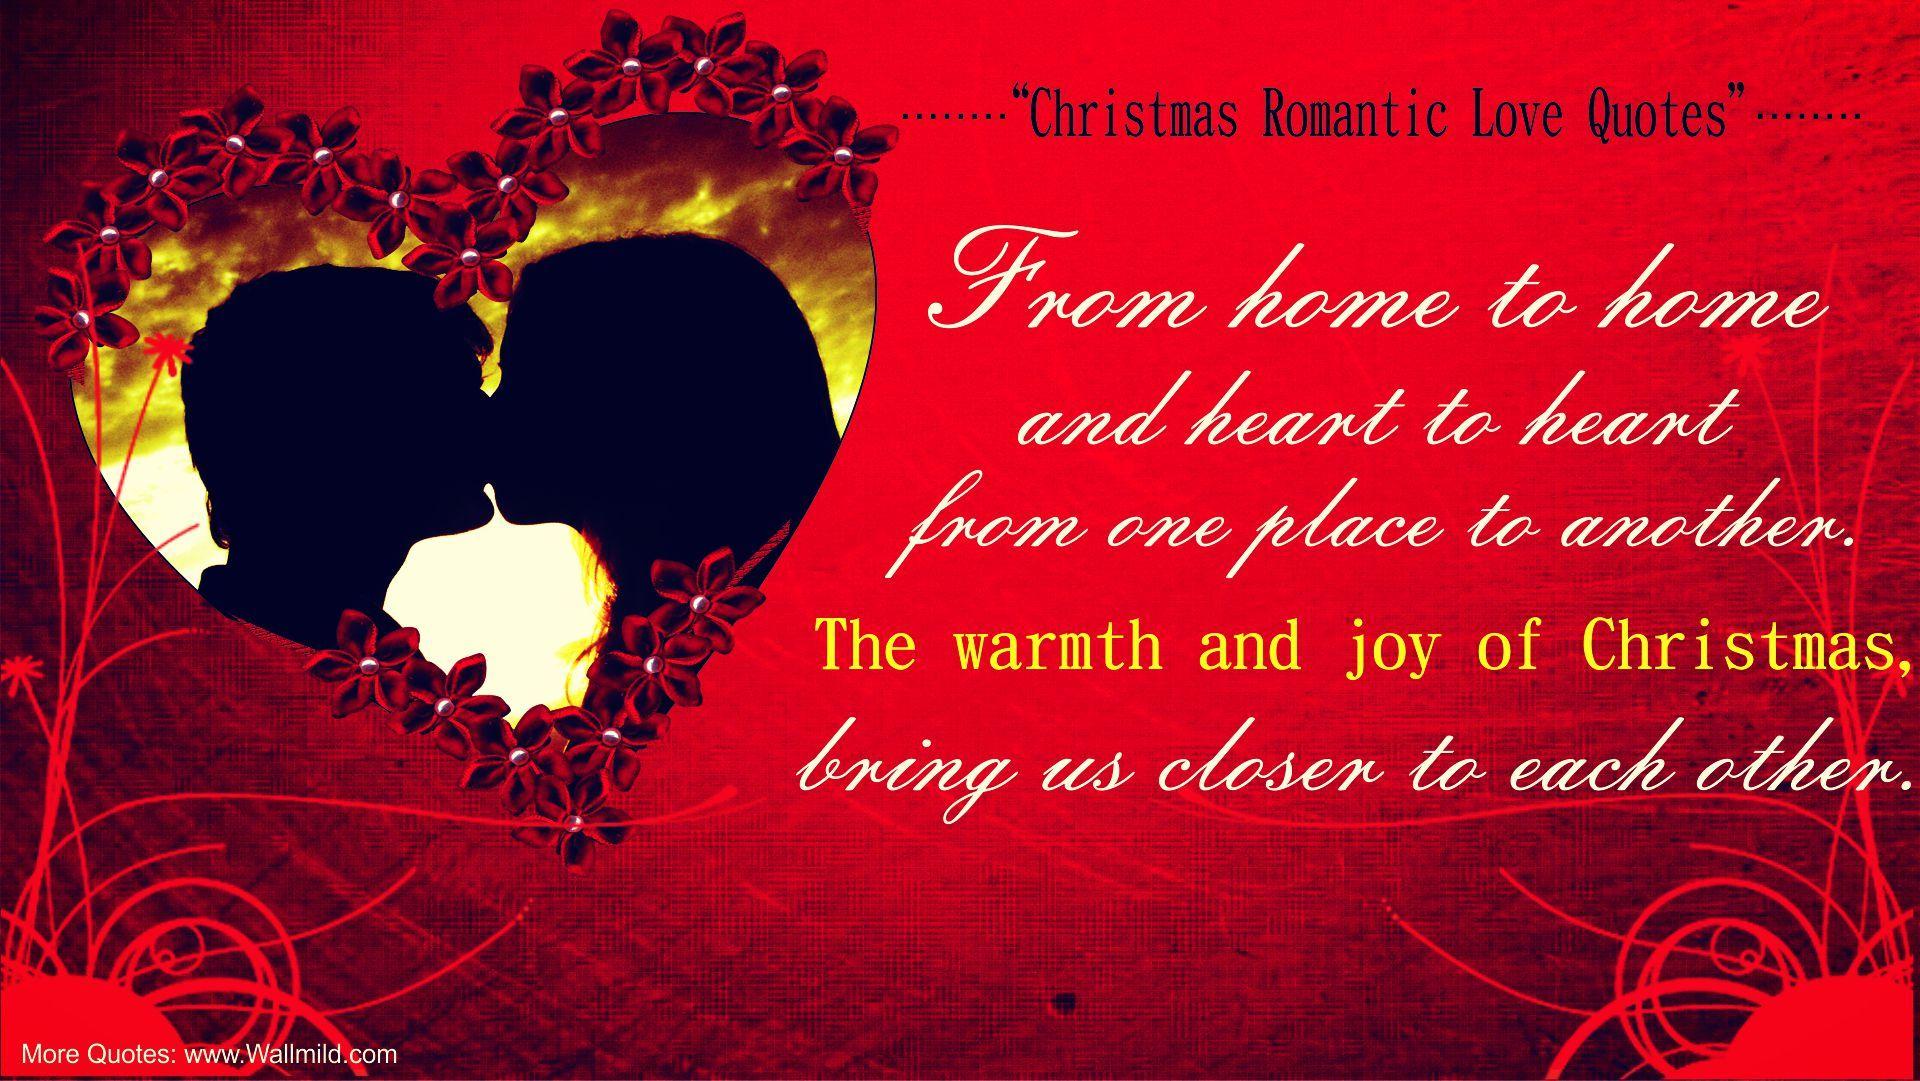 Christmas Love Quotes Wallpaper Free Download Wallpaper